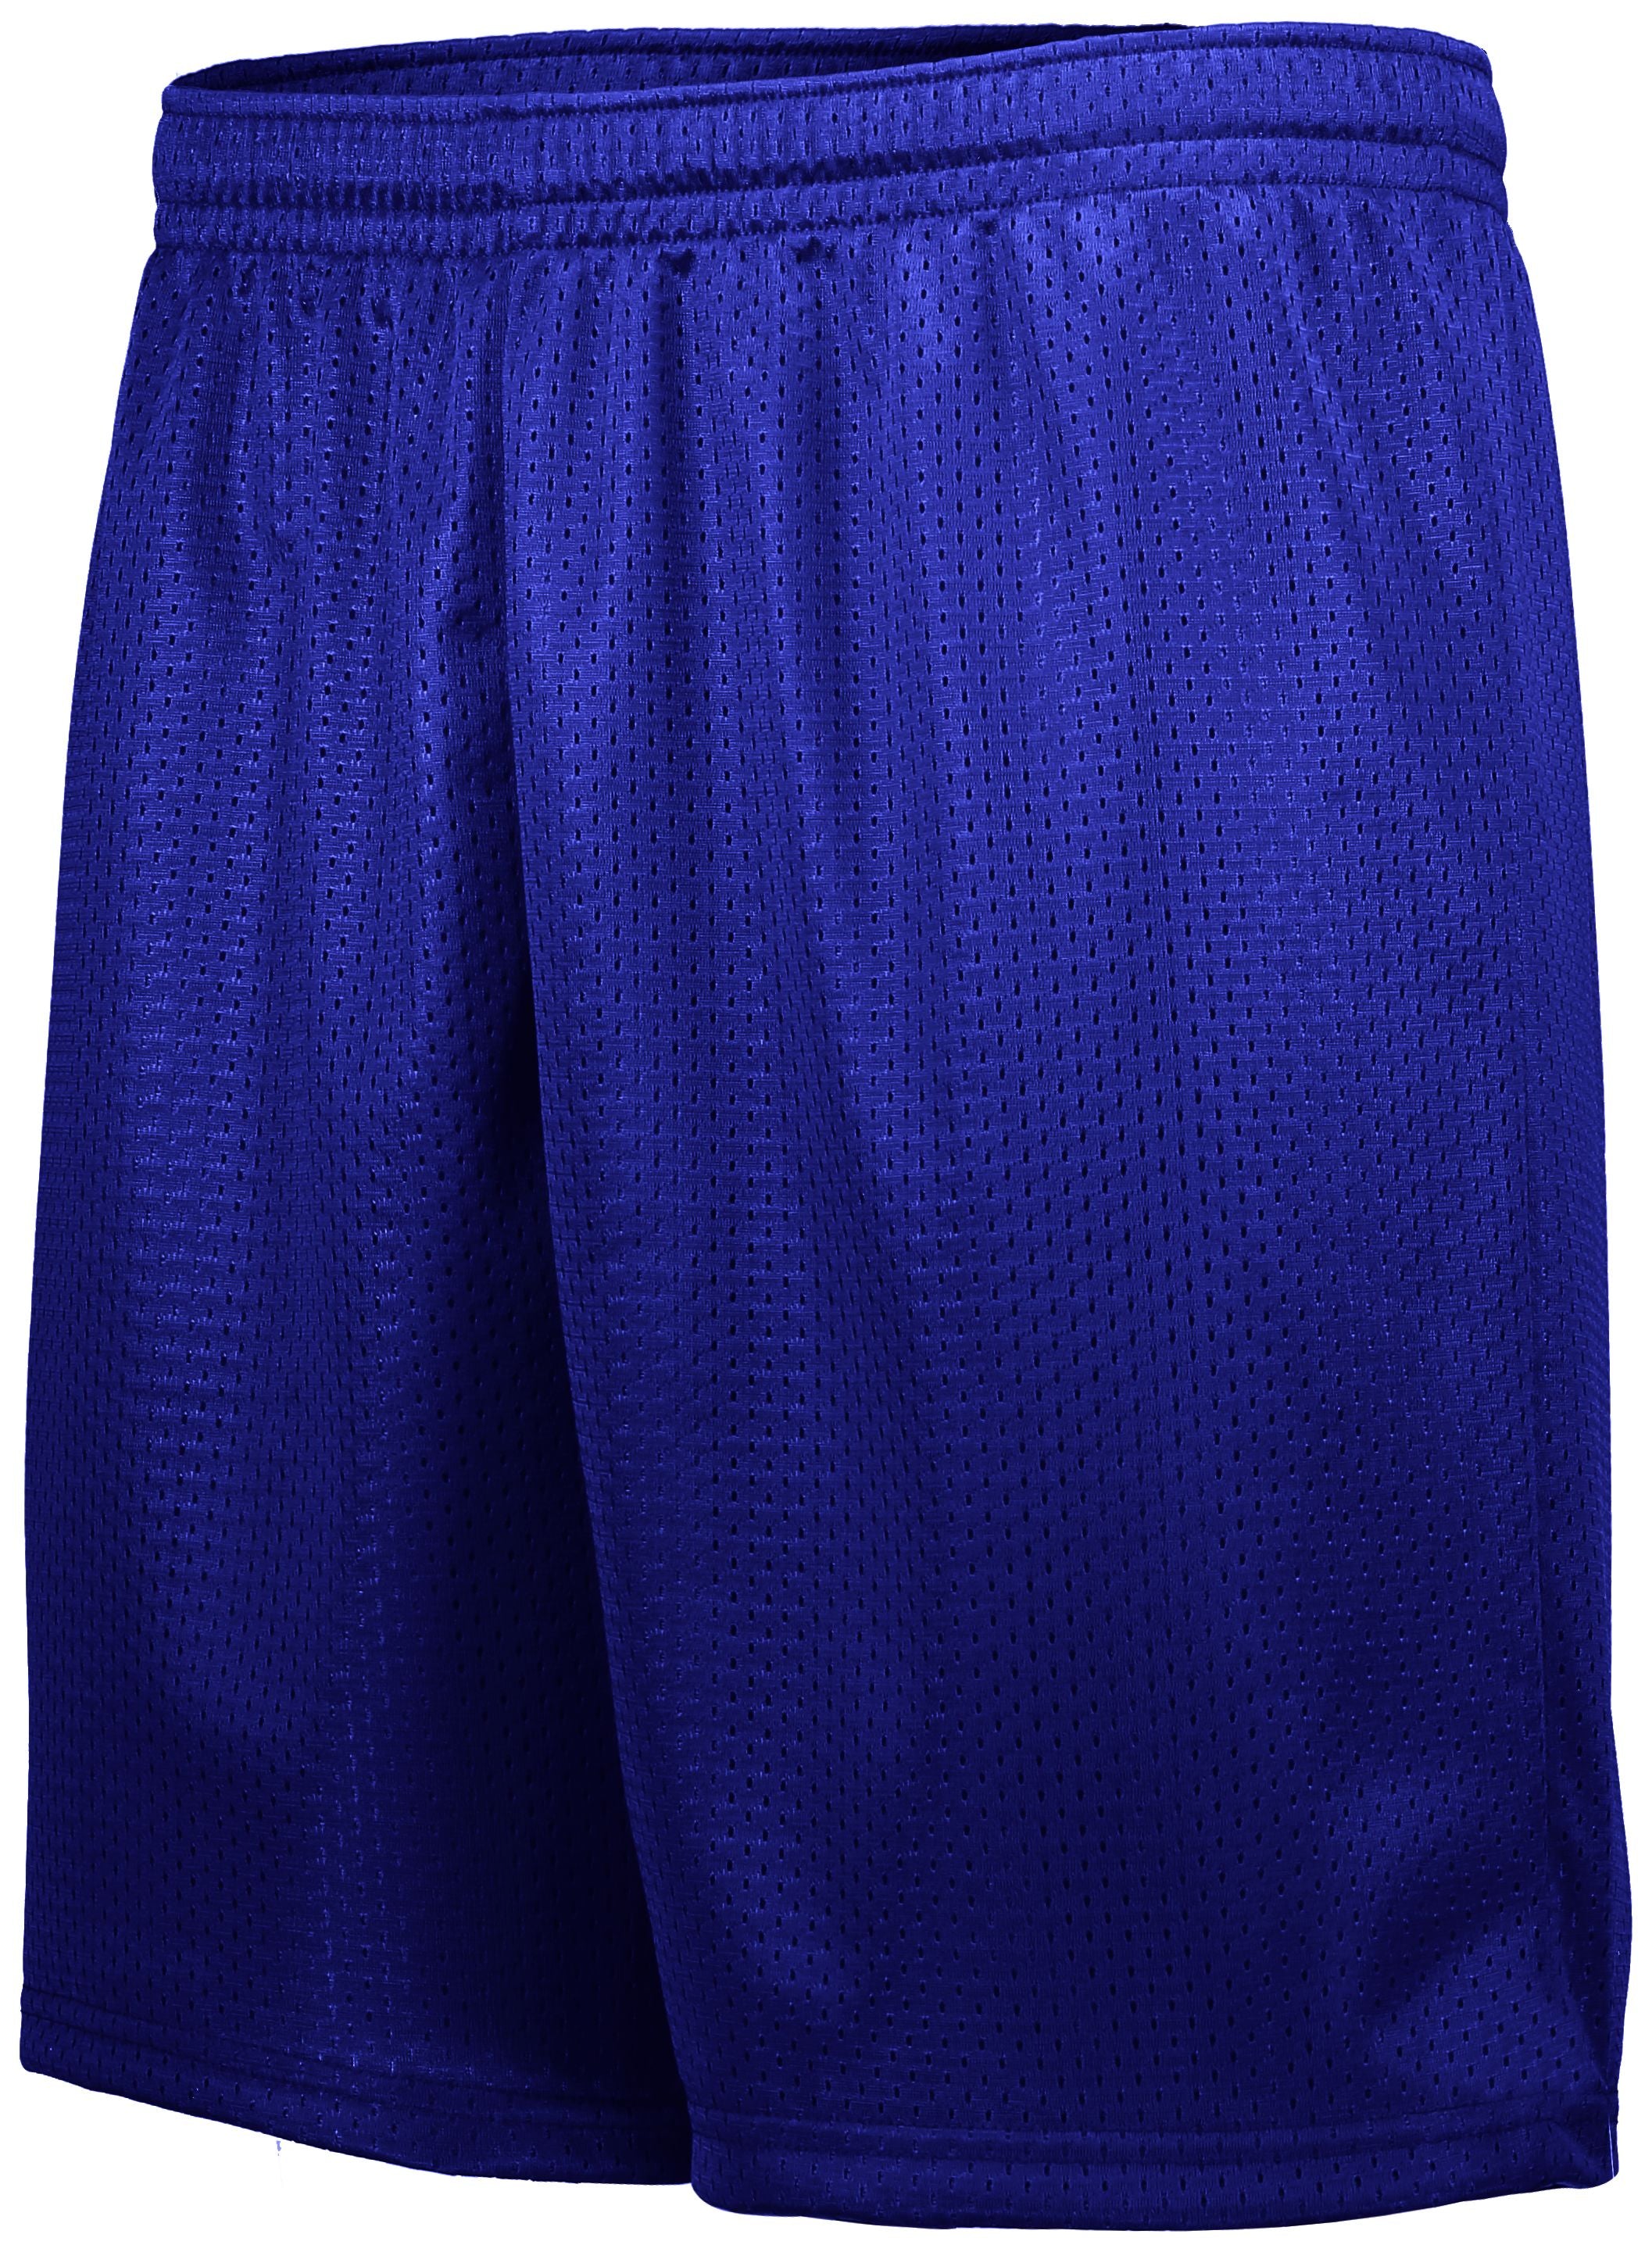 Augusta Sportswear Tricot Mesh Shorts in Purple (Hlw)  -Part of the Adult, Adult-Shorts, Augusta-Products product lines at KanaleyCreations.com